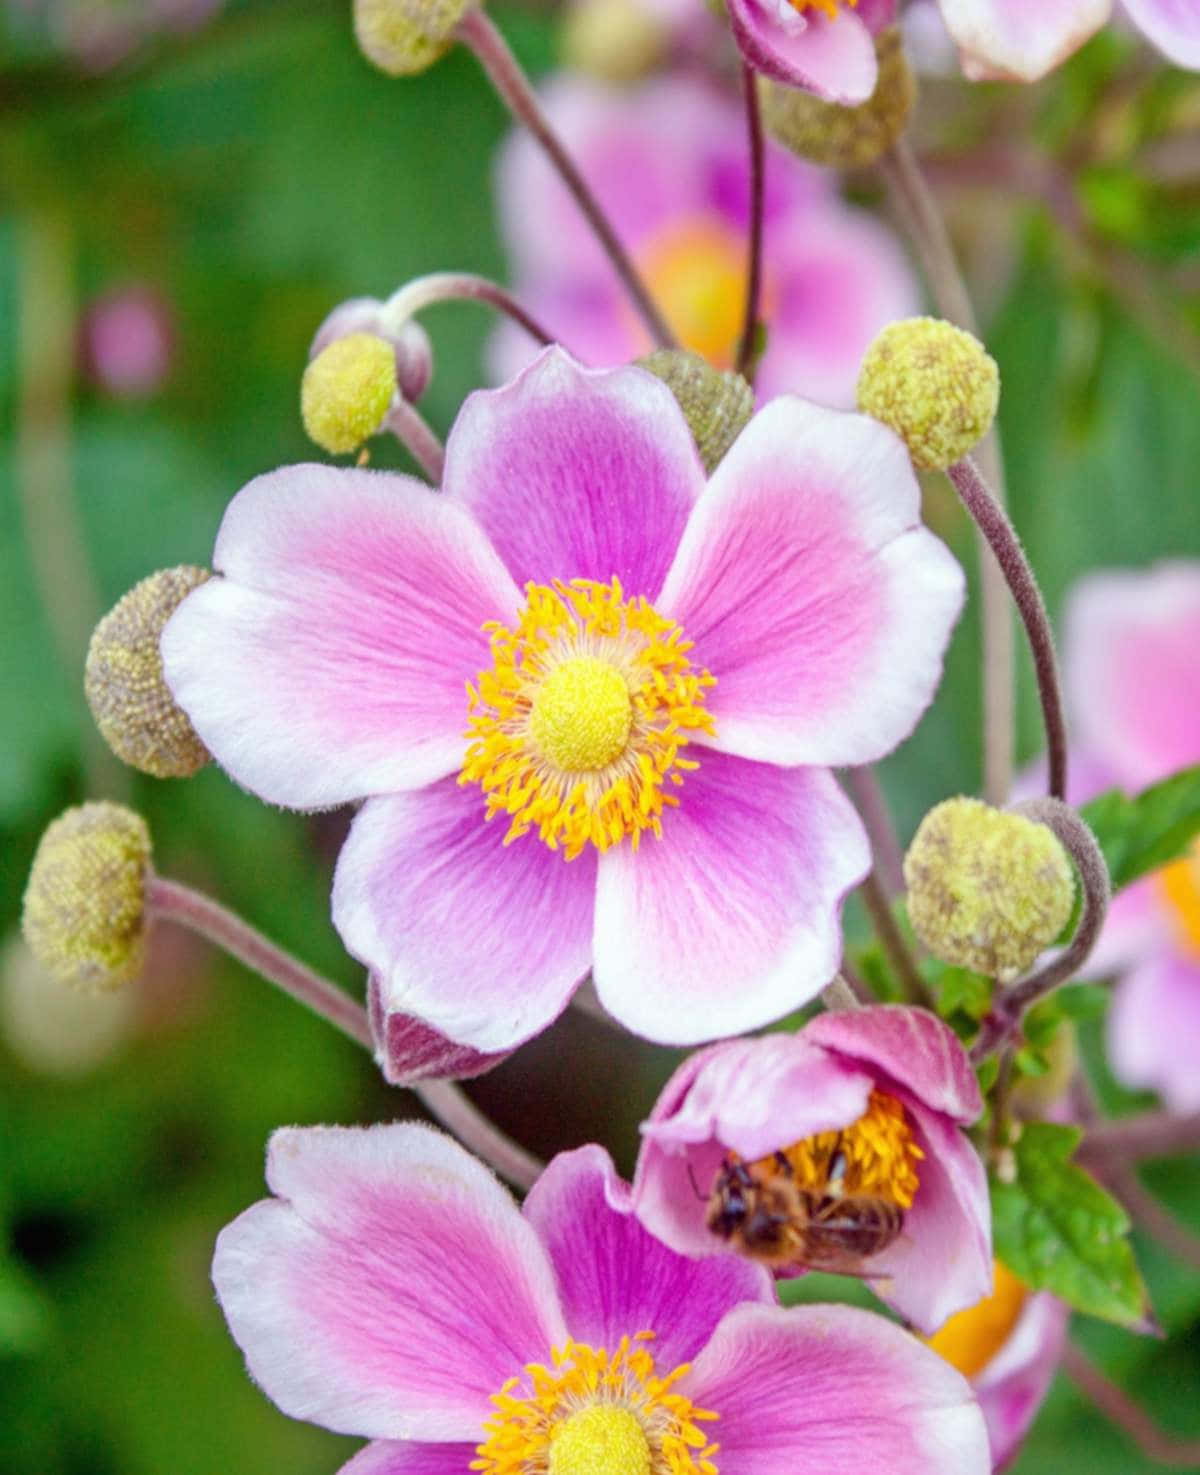 A beautiful Anemone flower blooming in a pastel garden.